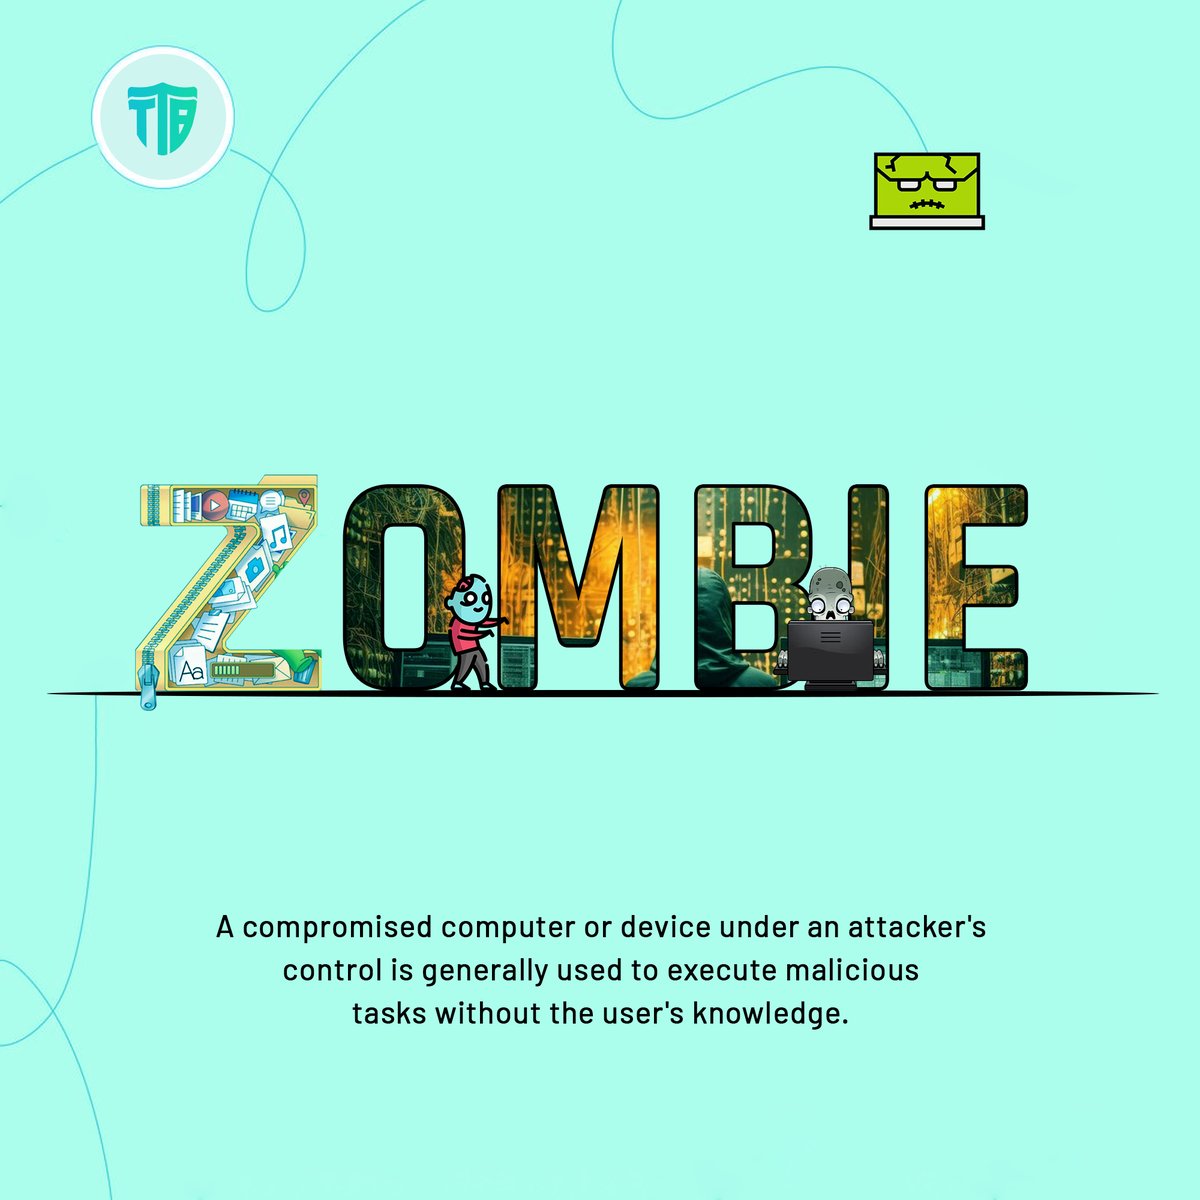 Today we discuss about 'Zombie'

A compromised computer or device under the control of an attacker, typically used to perform malicious tasks without the user's knowledge.

#zombie  #phishing #ZombieComputers #BotnetAttack #OnlineSecurity #SpamBot #Phishing #CyberAttack #ttb